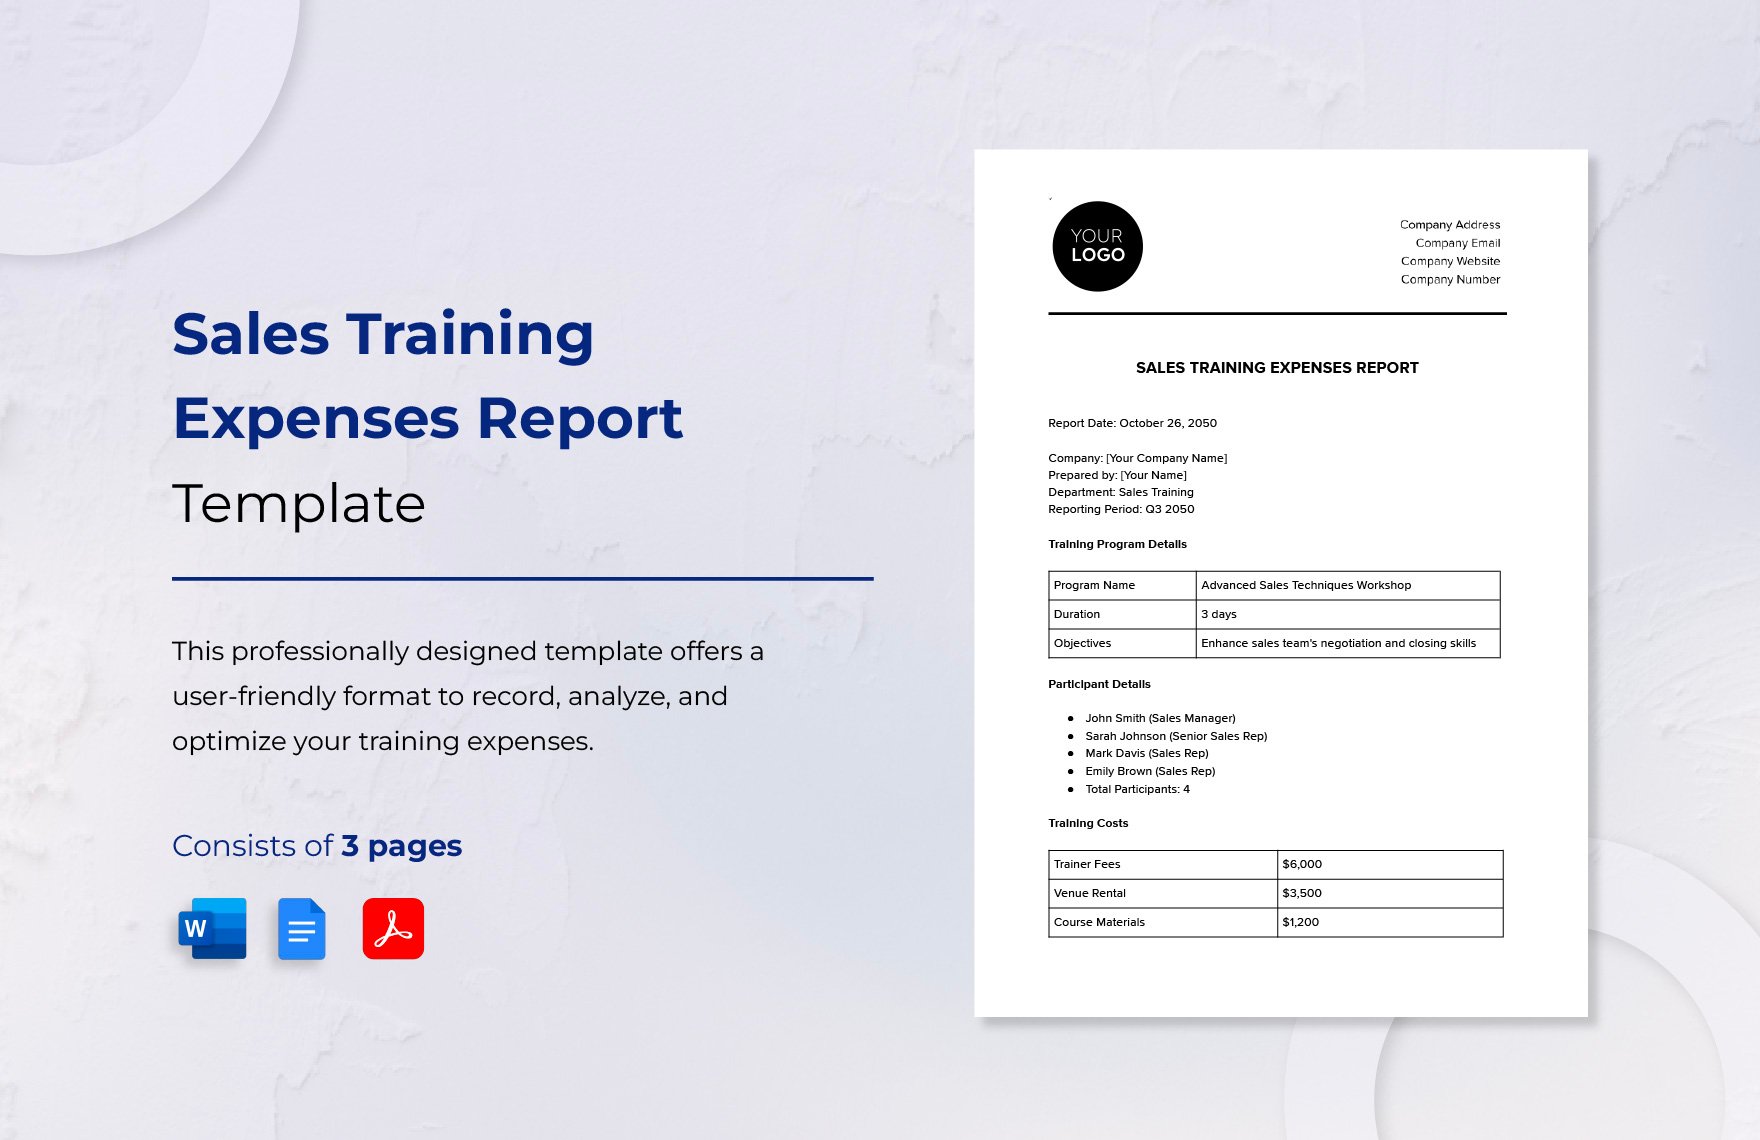 Sales Training Expenses Report Template in Word, Google Docs, PDF